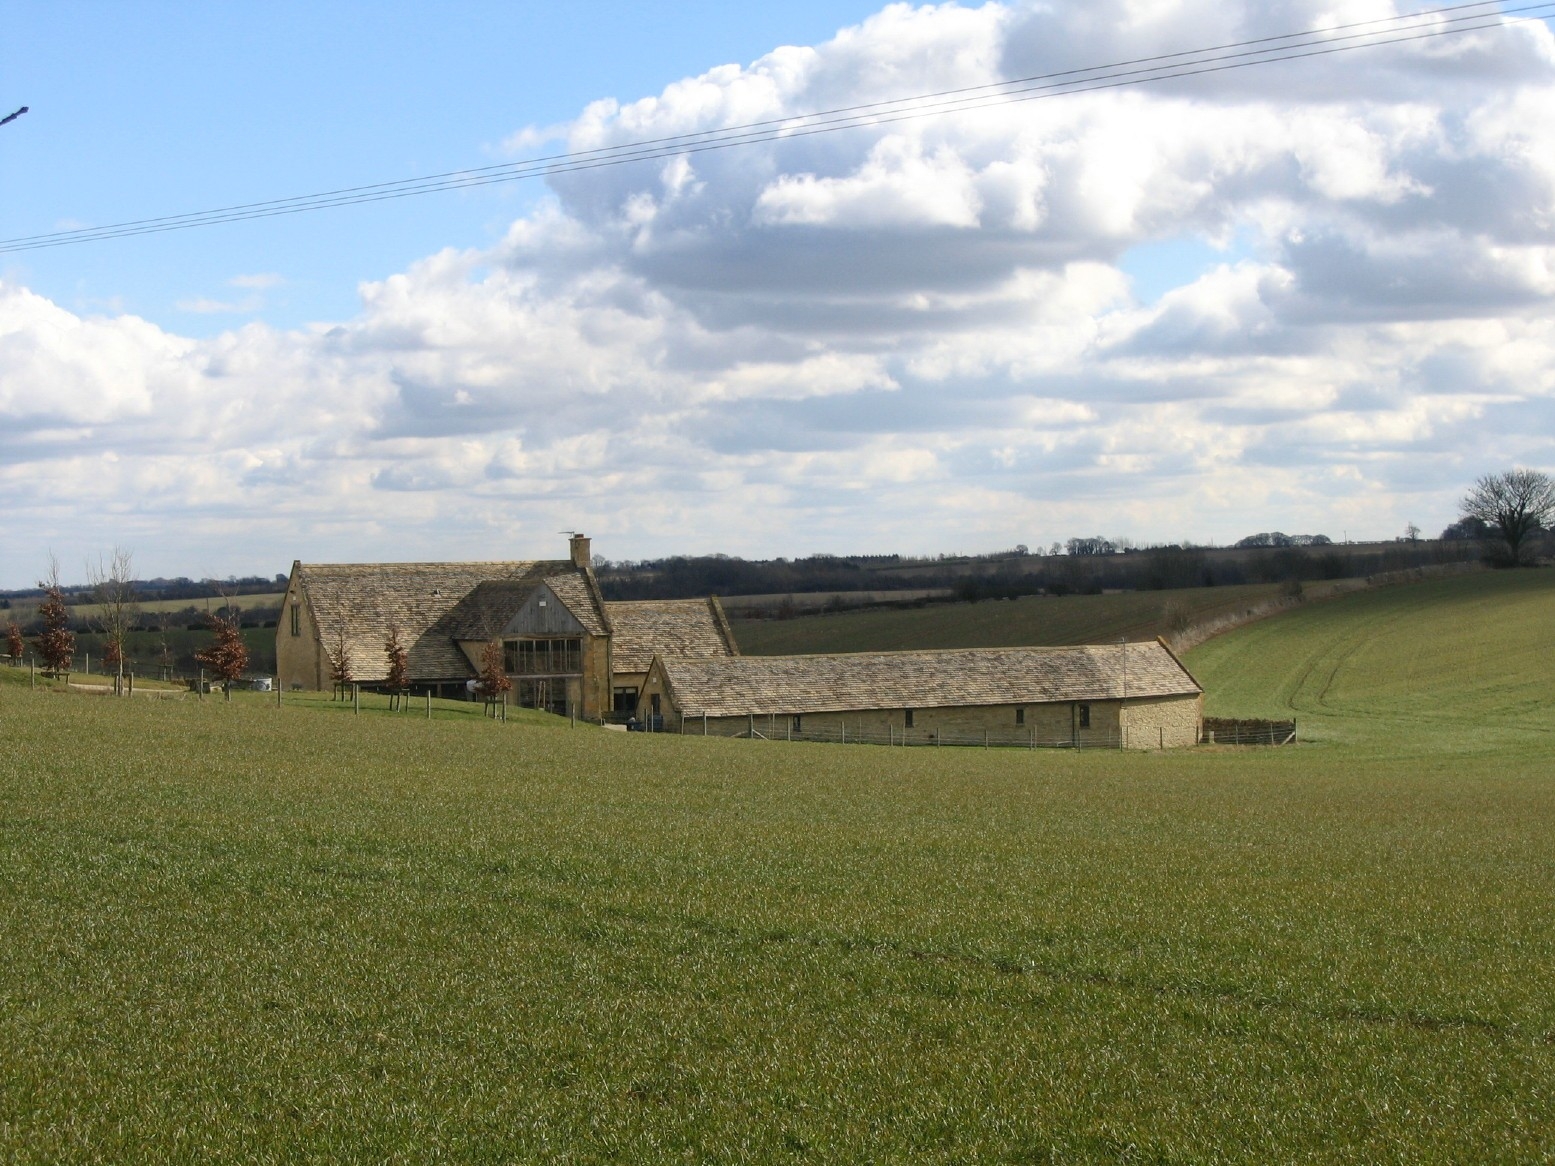 Stone farmhouse and building set in gently rolling landscape of fields of grass.